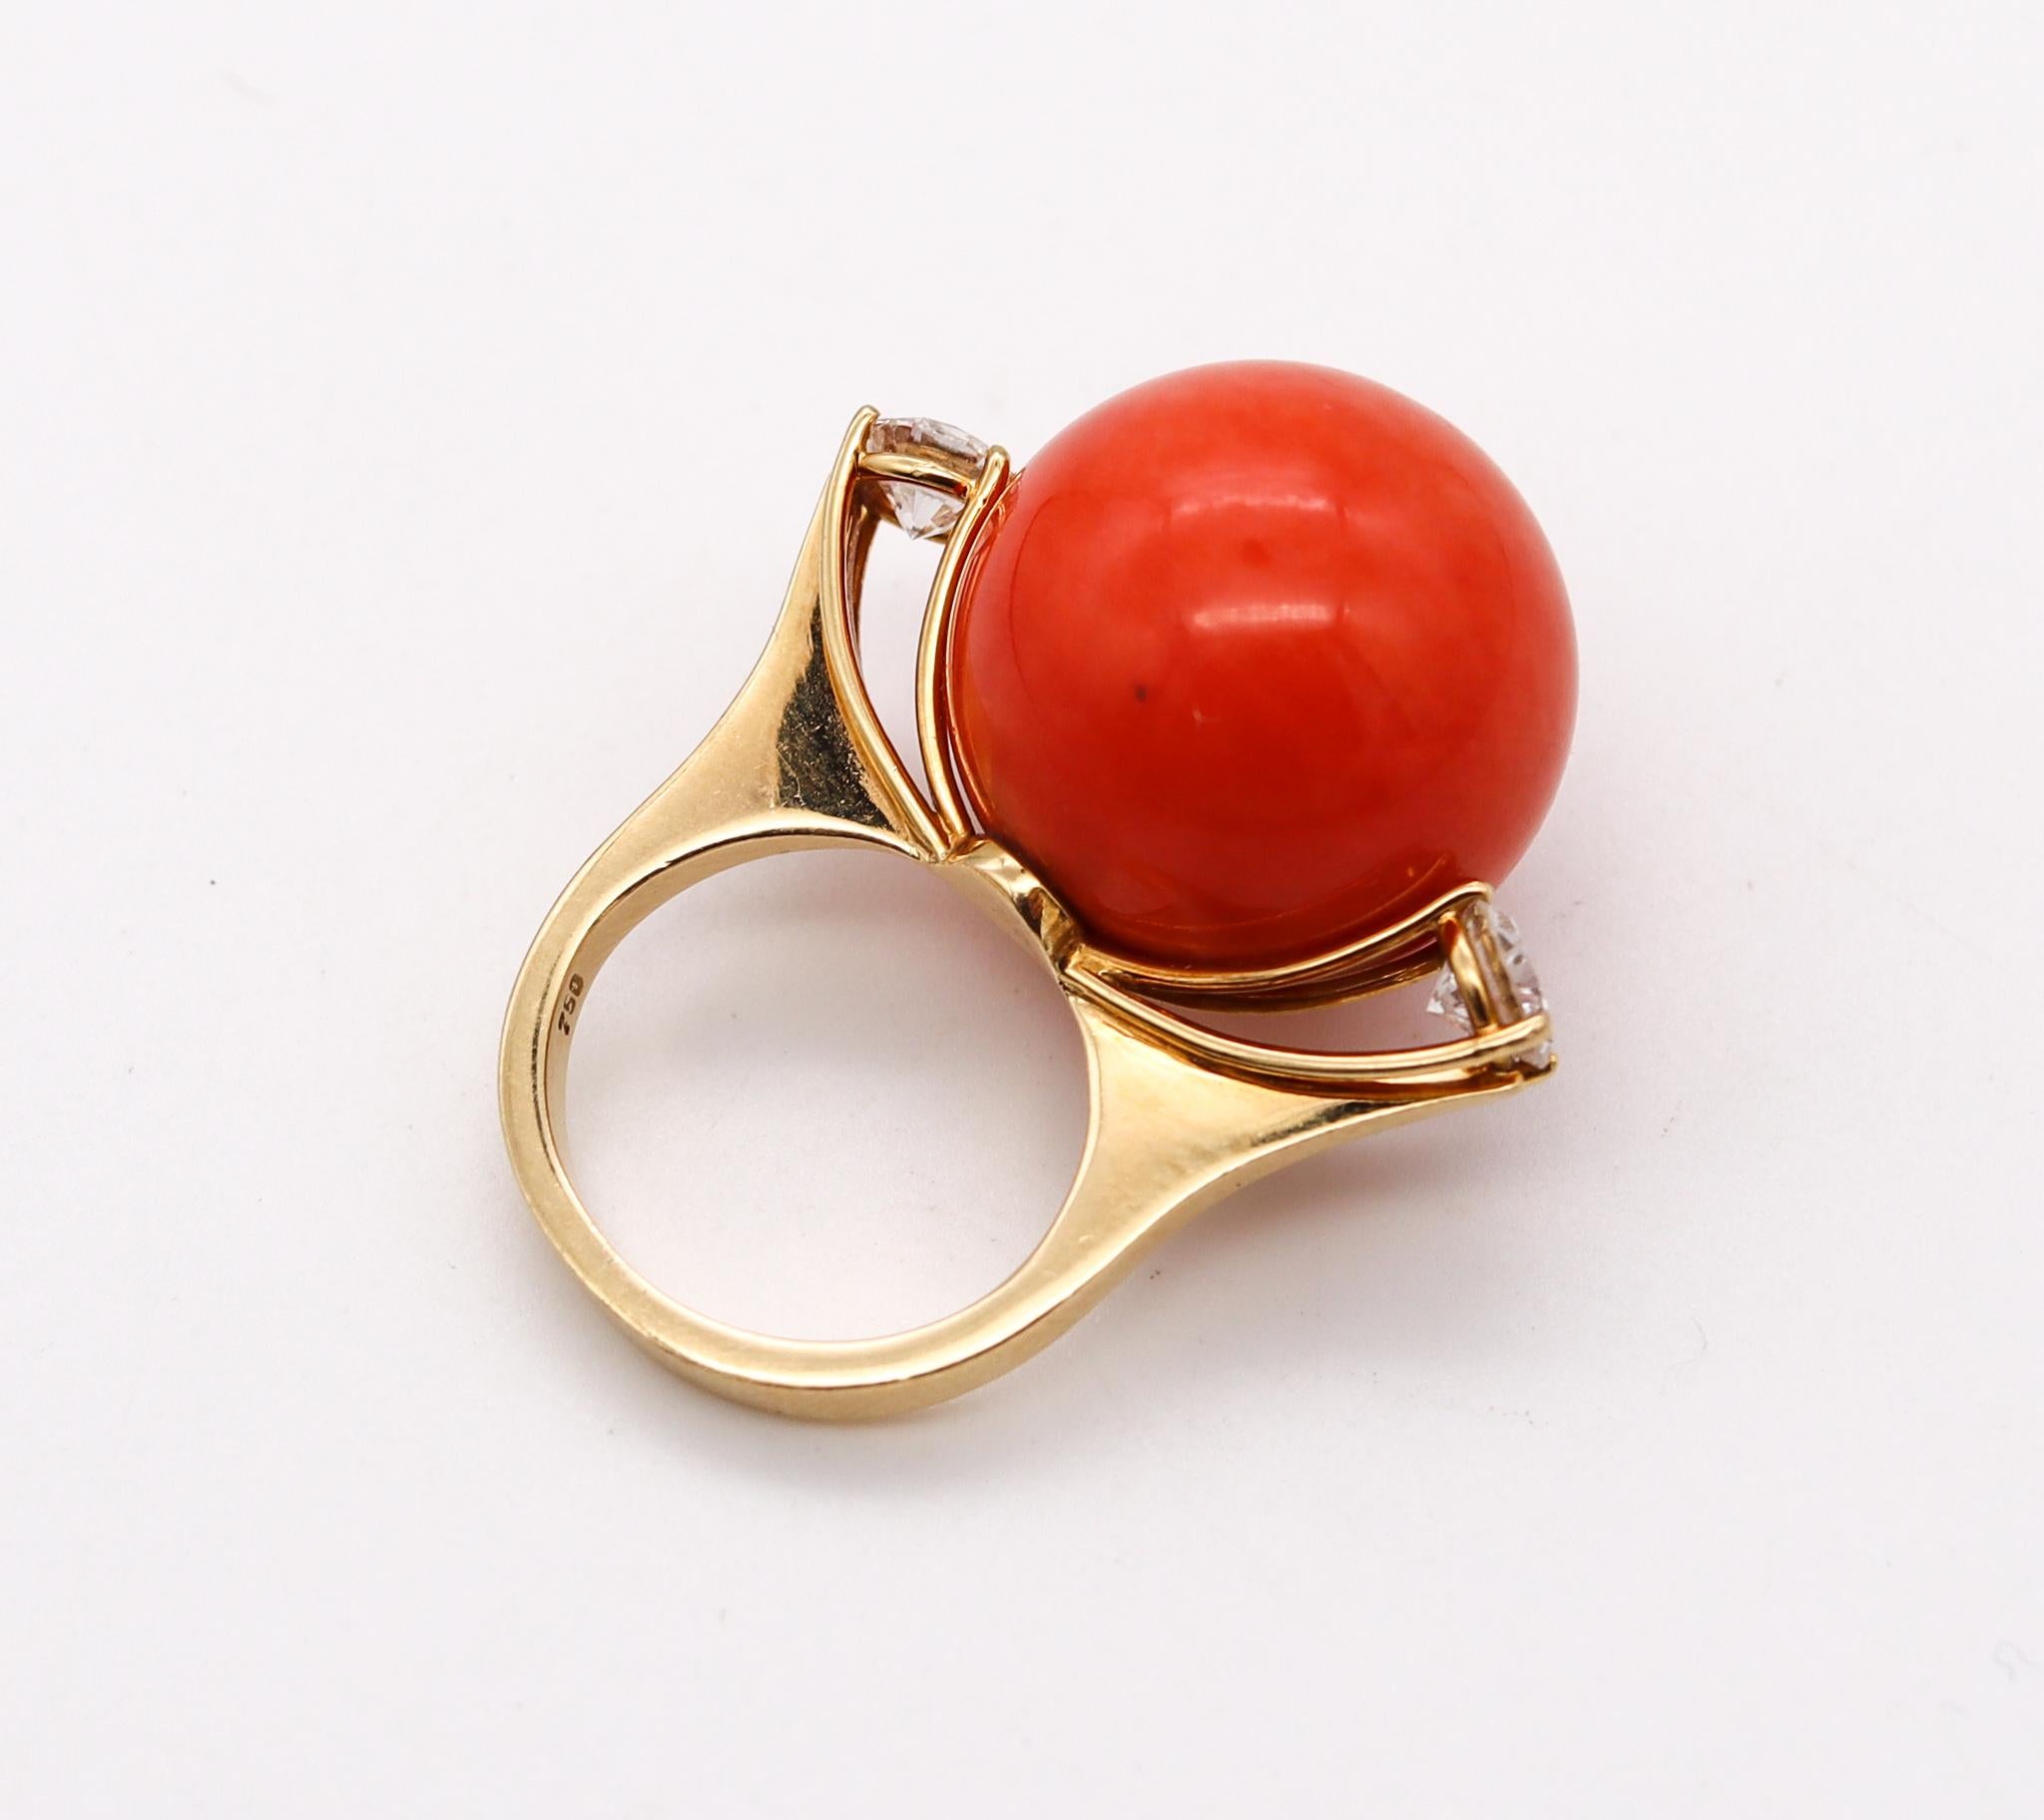 Modernist 1970 Italian Cocktail Ring In 18Kt Gold 27.17 Ctw In Diamonds & Coral For Sale 1